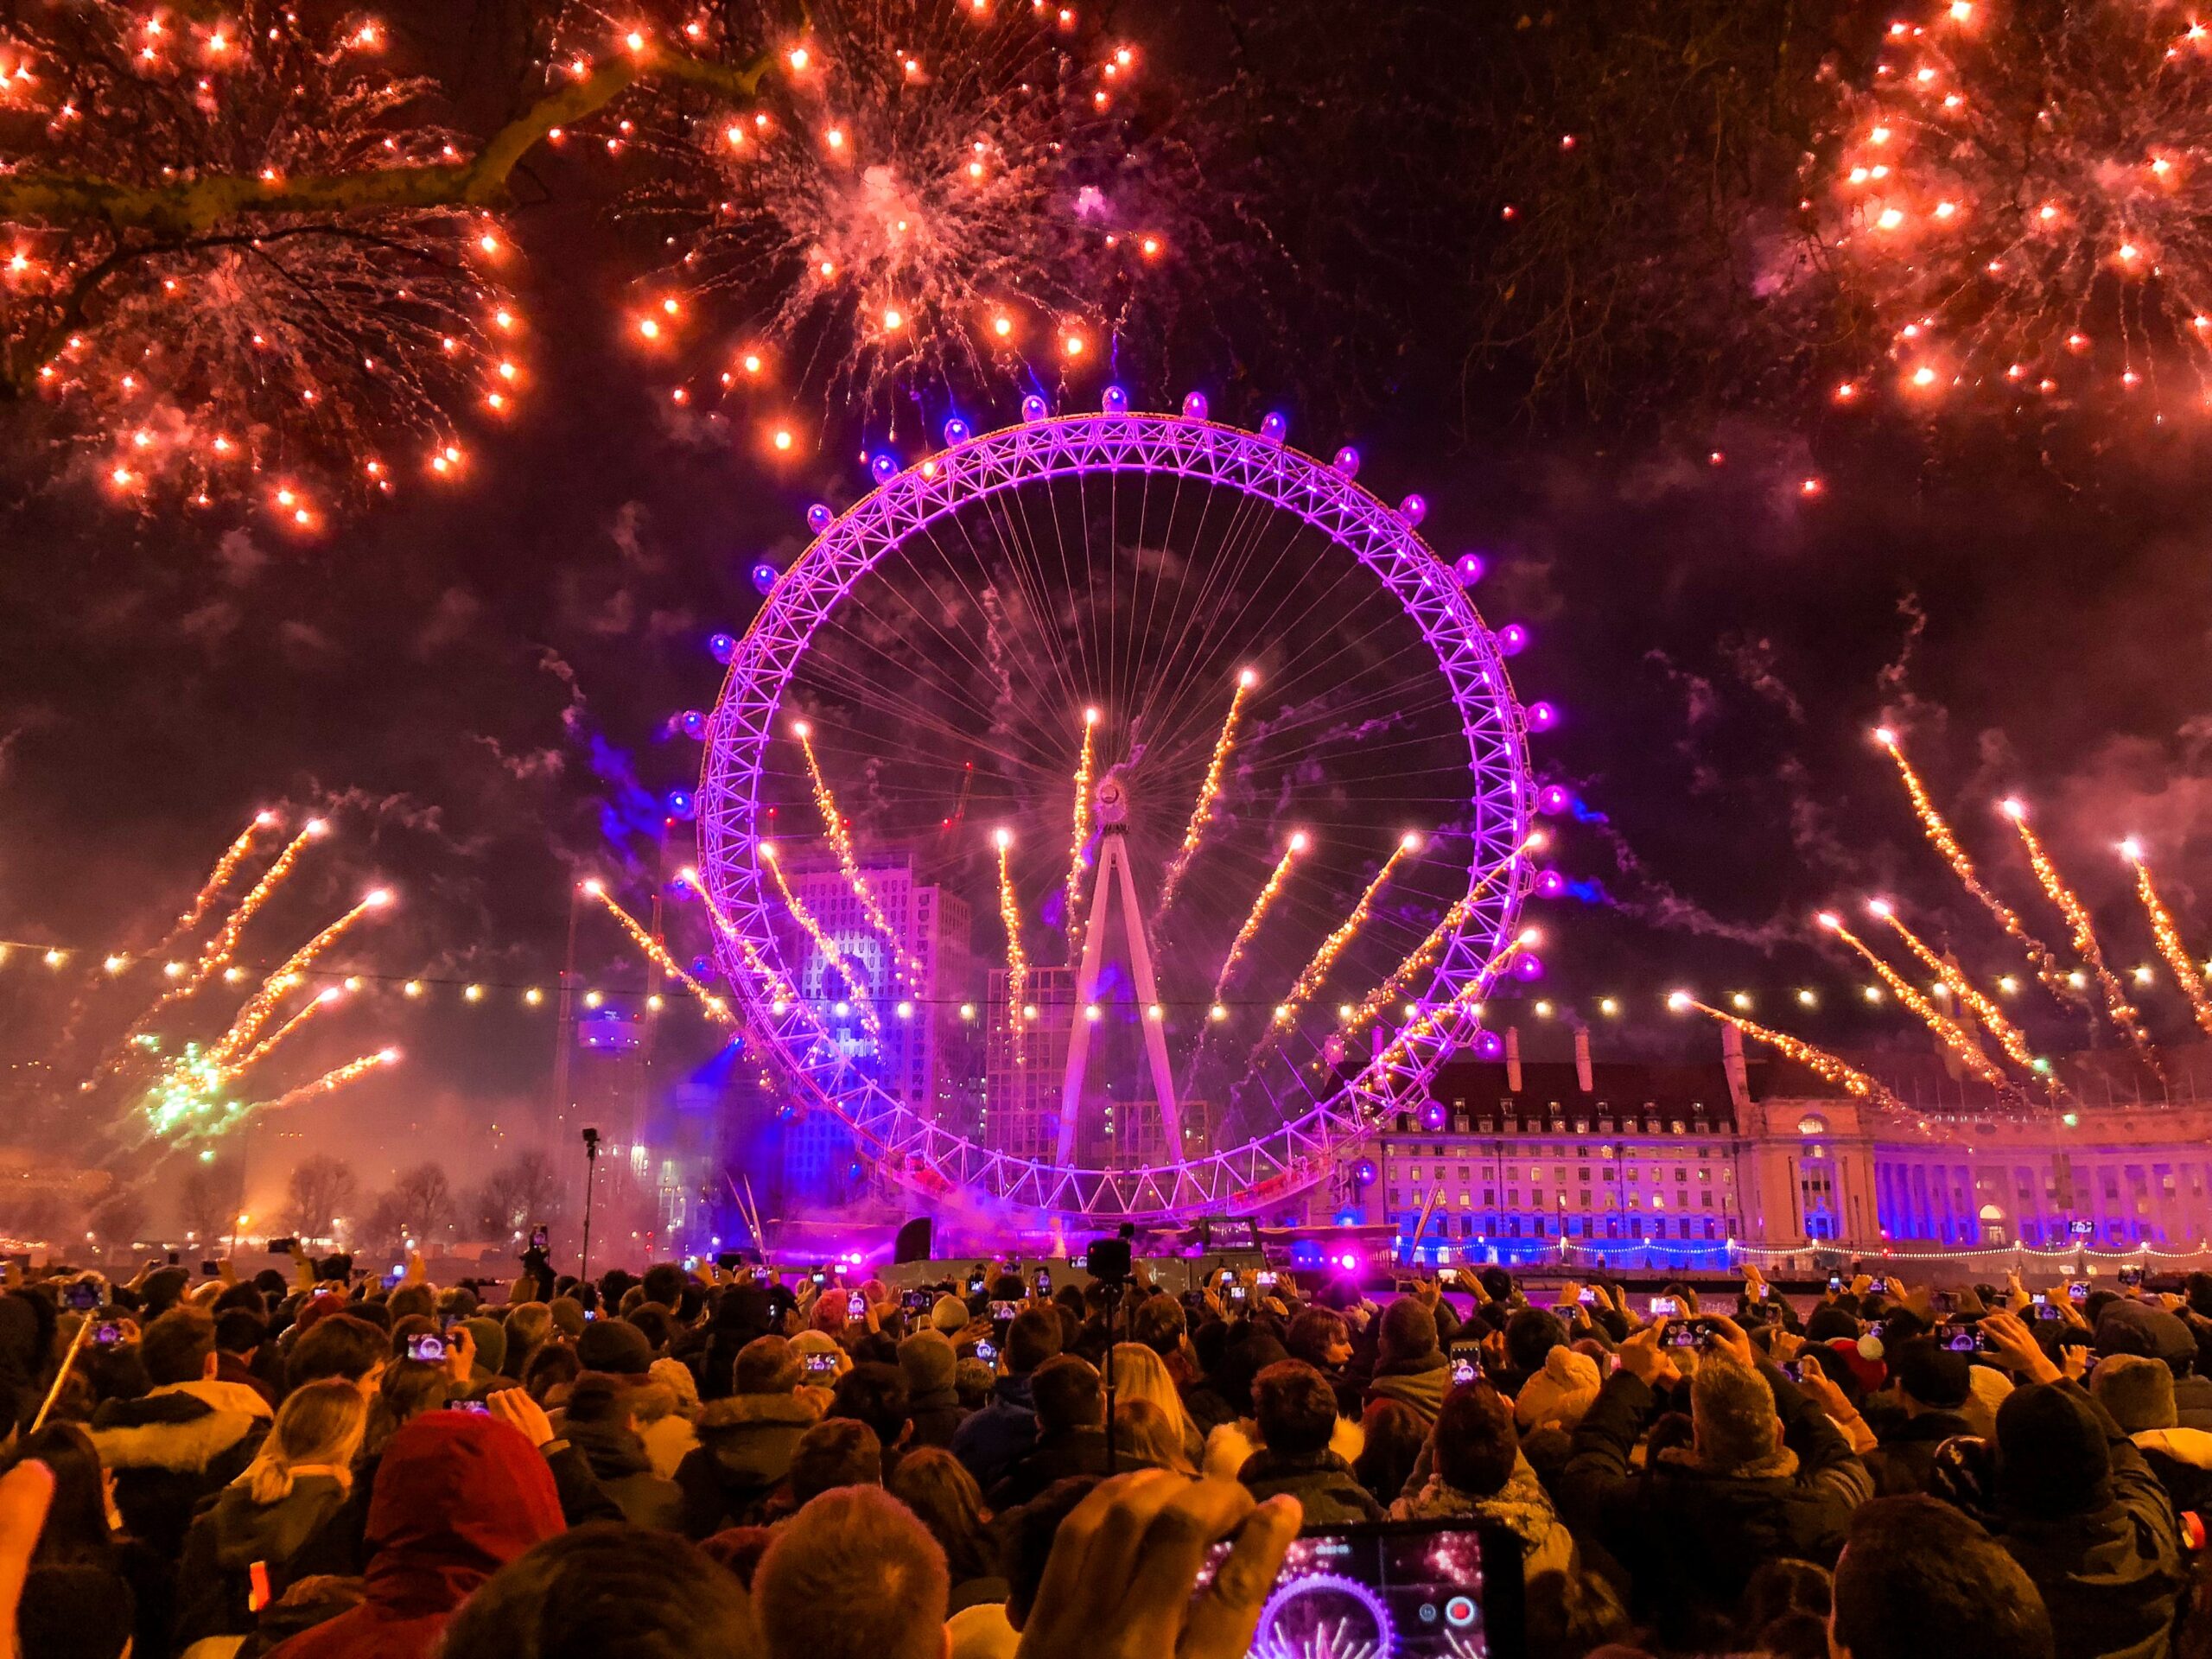 London New Year Fireworks Cancelled for Second Year Running